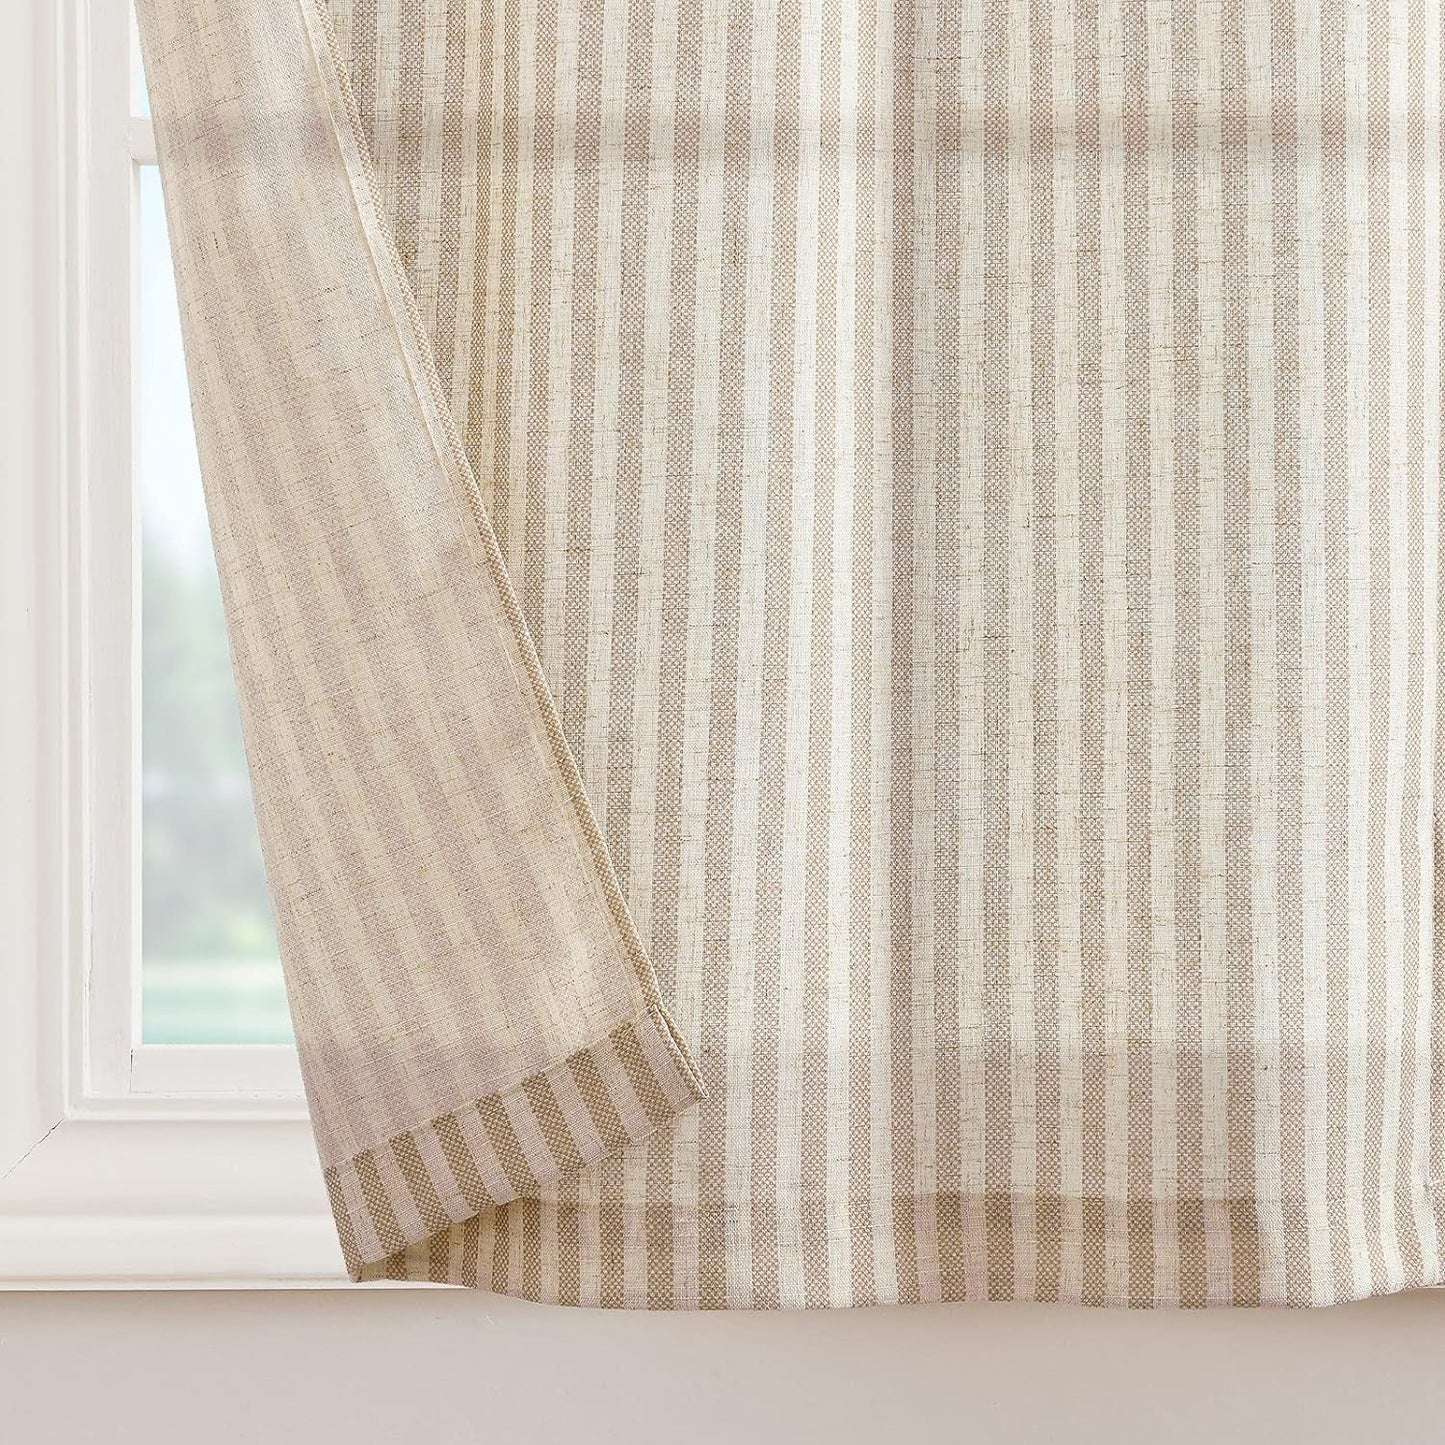 Jinchan Kitchen Curtains and Valances Set Striped Tier Curtains Ticking Stripe Linen Curtains Pinstripe Cafe Curtains 36 Inch for Living Room Bathroom Farmhouse 3 Pieces Set Rod Pocket Taupe on Beige